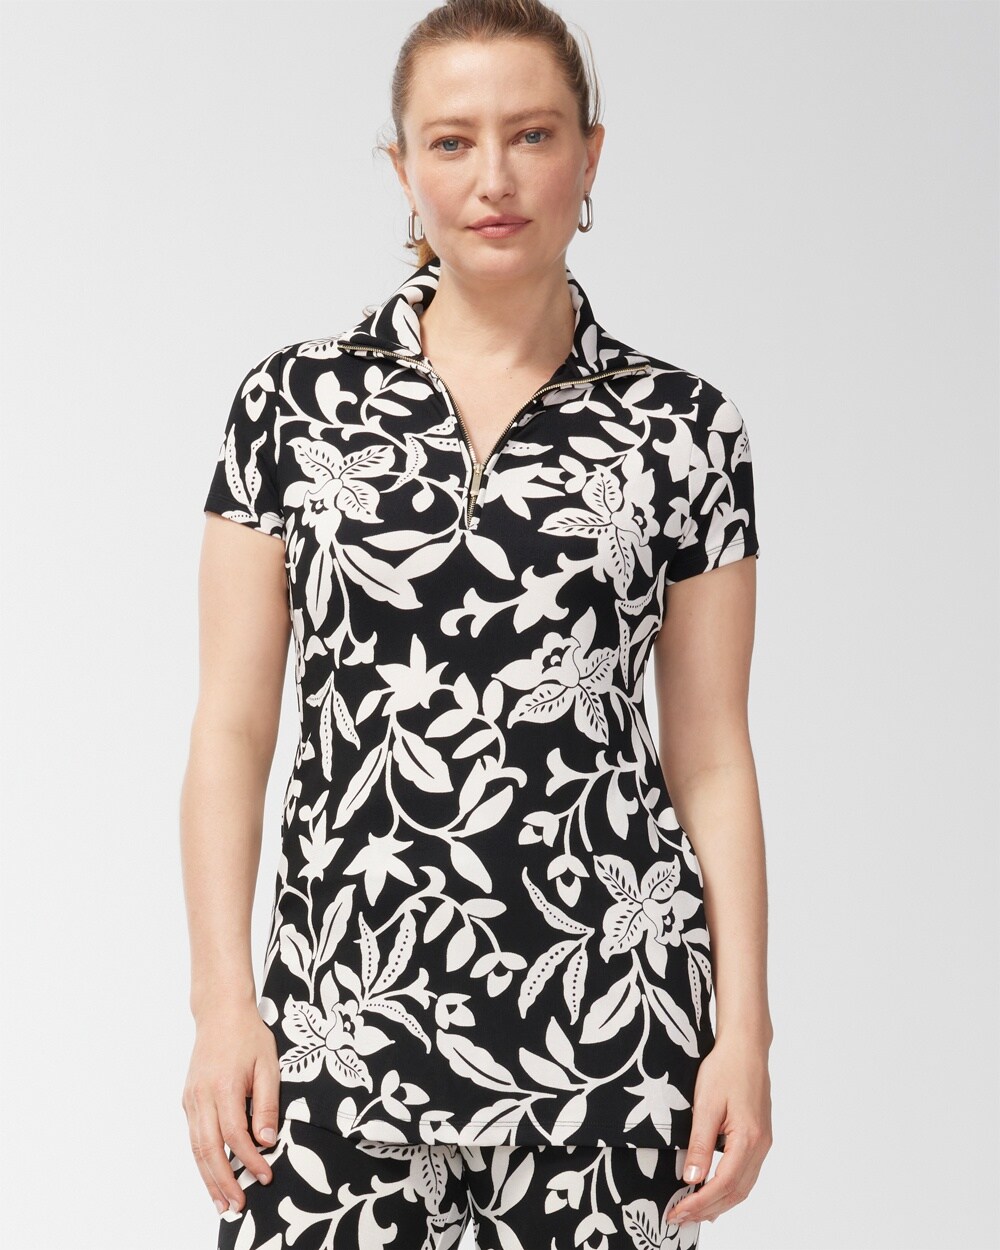 Travelers Floral Print Zip Front Top video preview image, click to start video